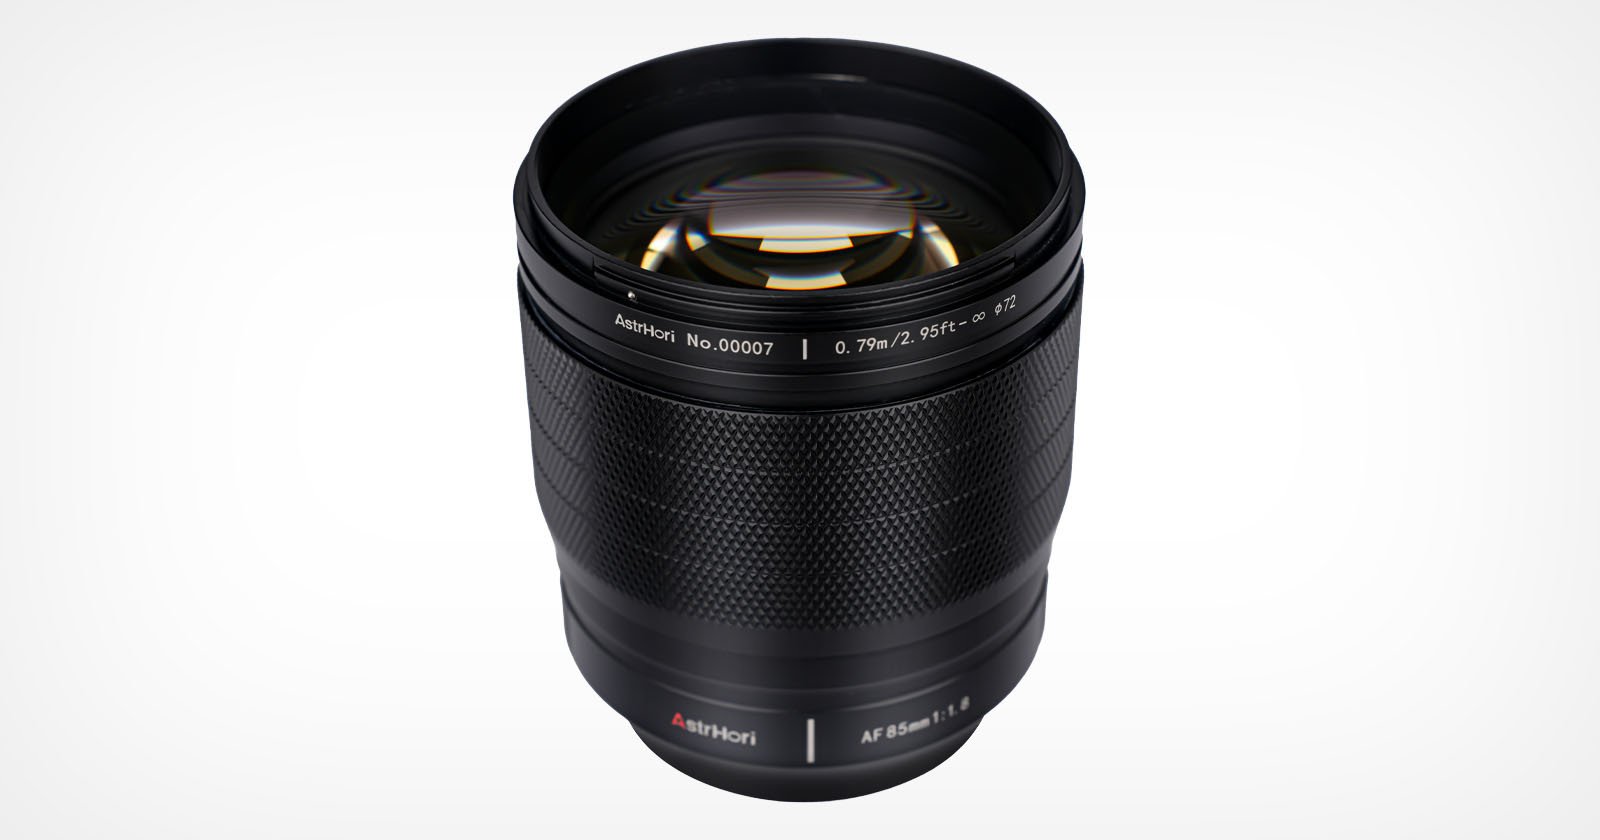  astrhori 85mm lens sony e-mount costs just 